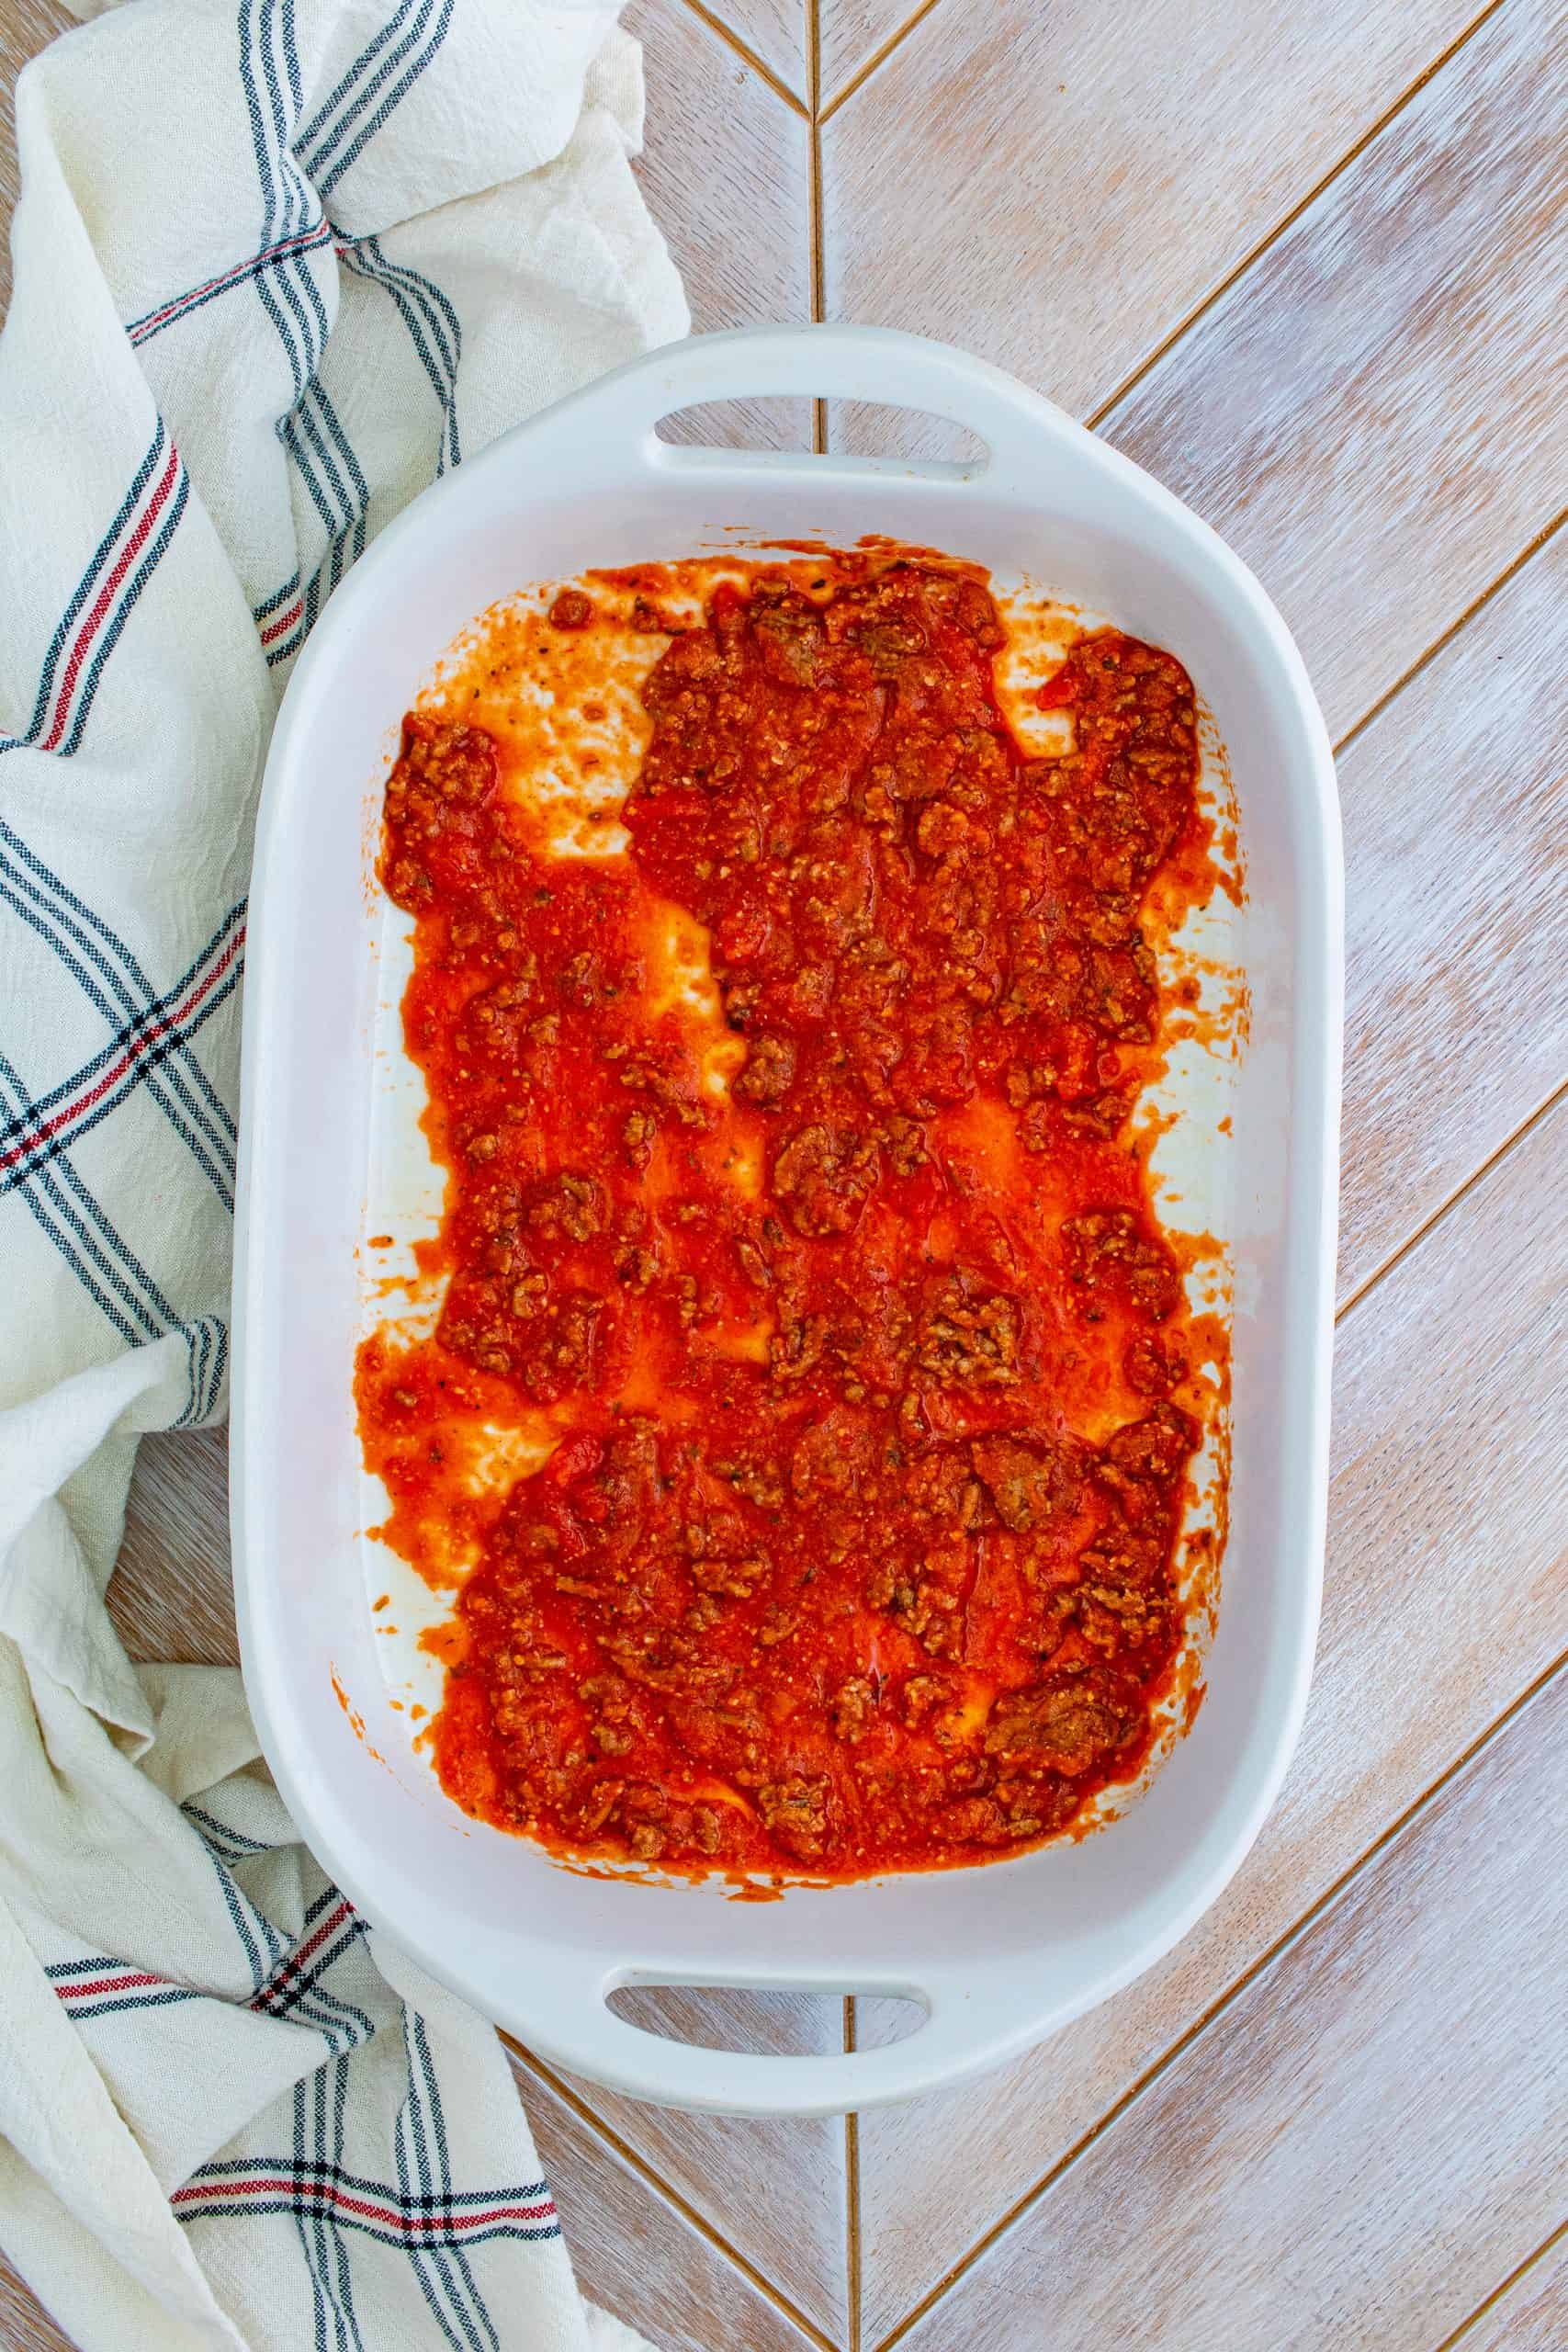 Meat sauce added to bottom of a white rectangle baking dish.